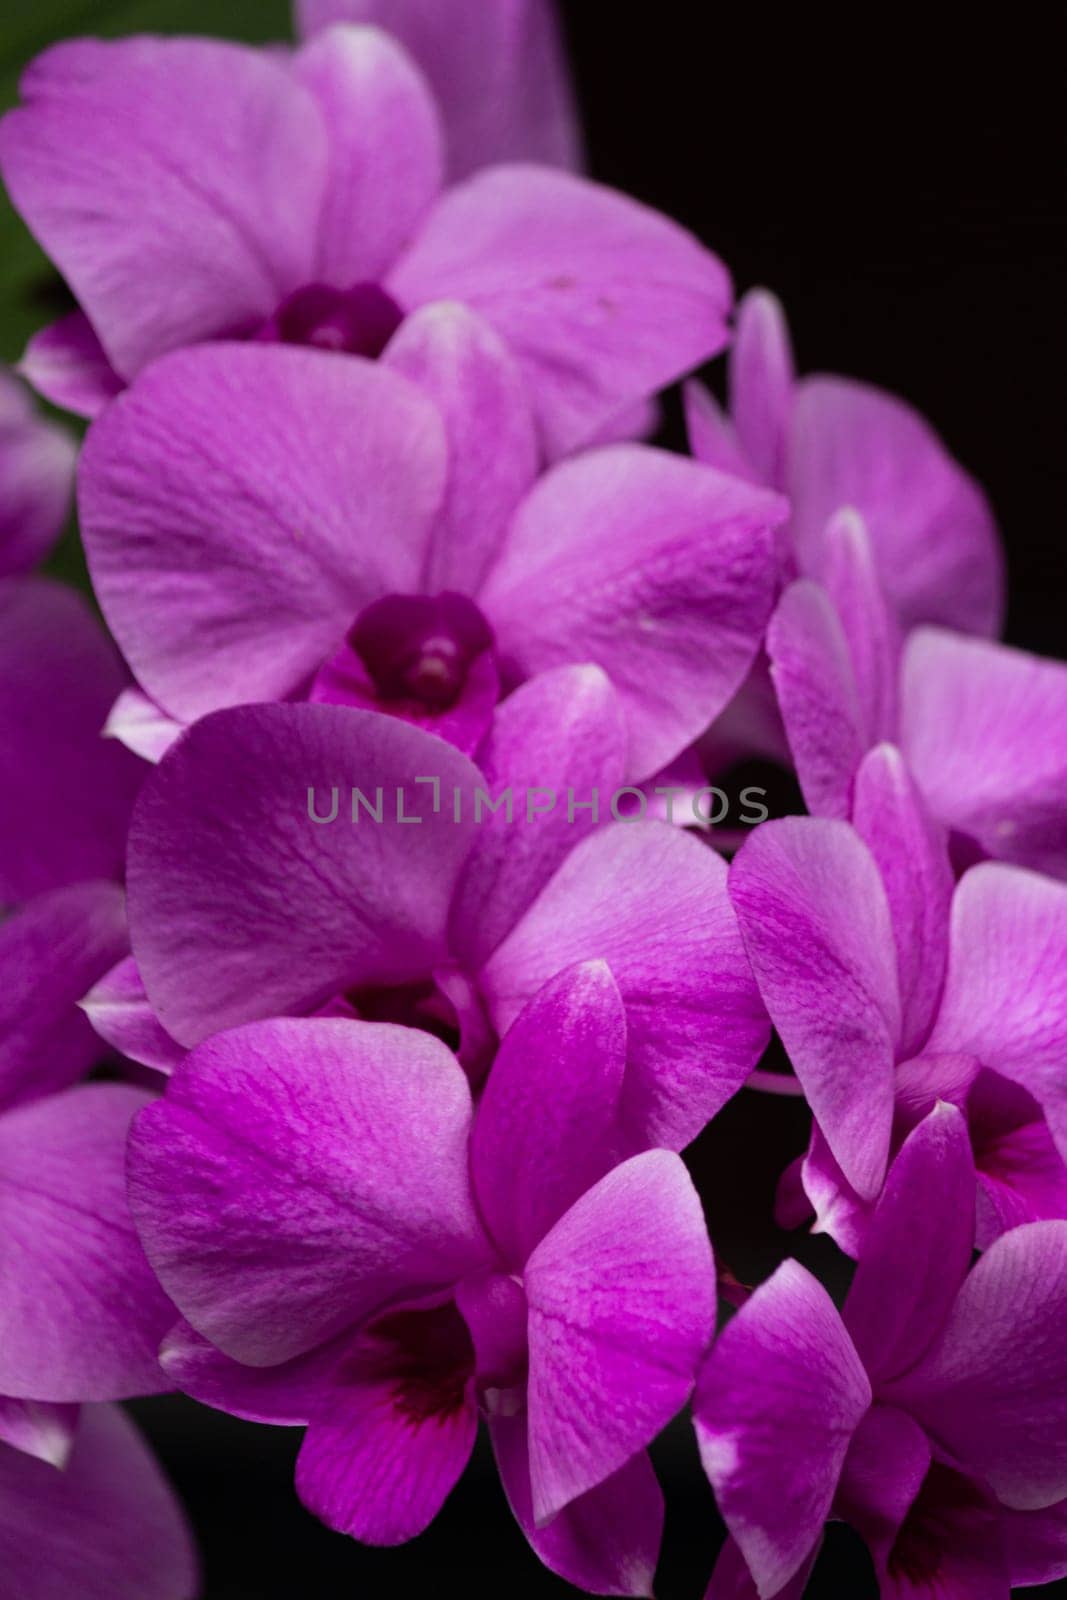 Set of purple orchid images by nuisk17